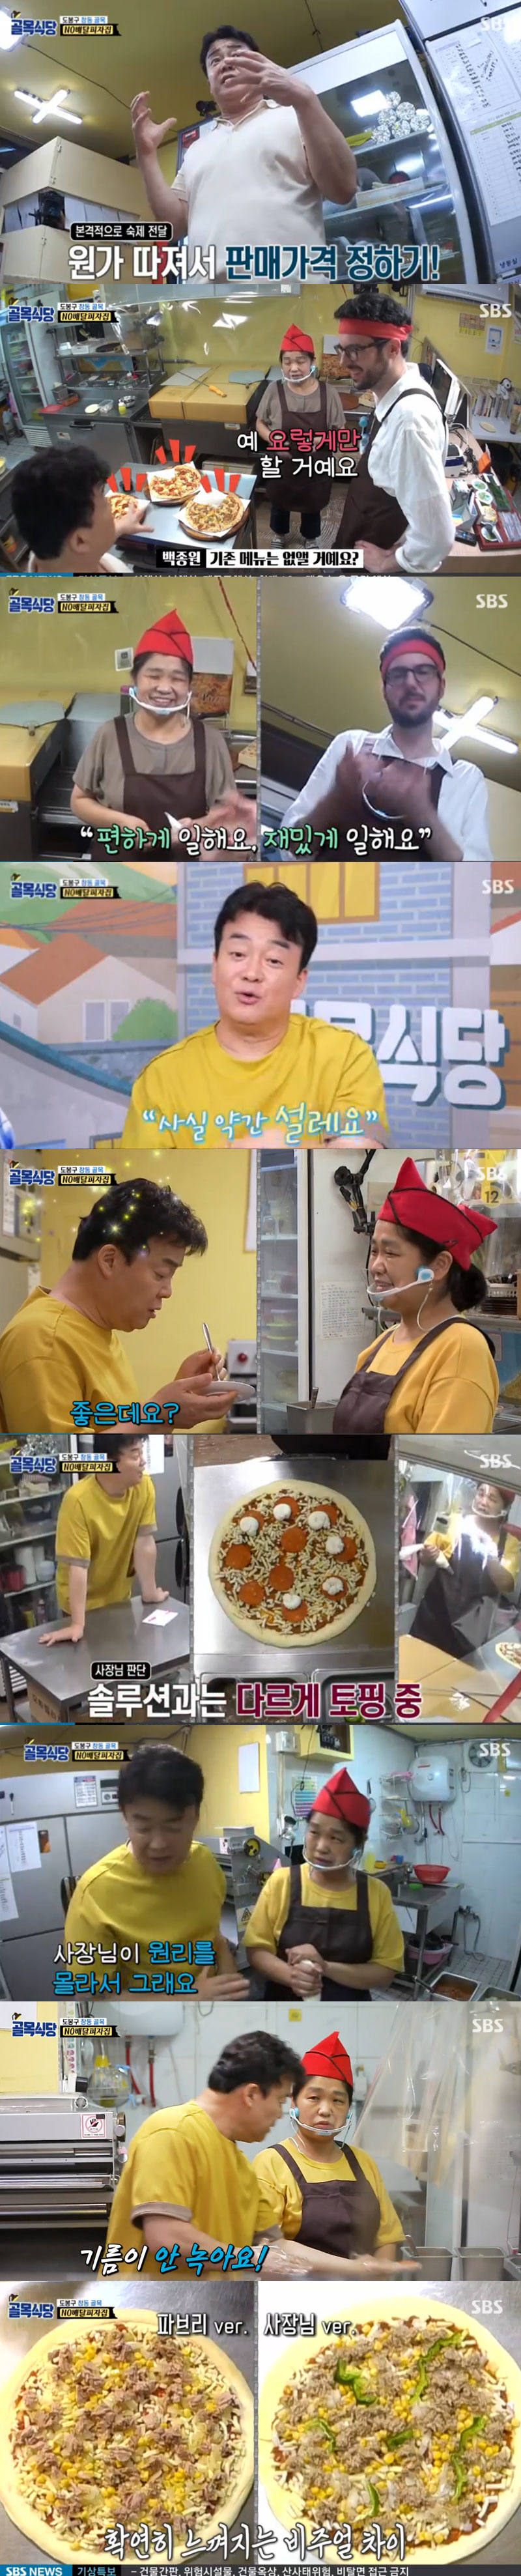 The ally restaurant Lee Seung-gi and Cho Kyuhyun made a surprise appearance.SBS Baek Jong-wons The alley restaurant broadcasted on the 26th was broadcast on the 25th alley Dobong-gu Changdong Alley.On this day, Baek Jong-won headed to the Chicken Gangjeong House. Baek Jong-won, who found Garlic as soon as he entered the store, said, Why did you tell me not to use minced Garlic?I asked.I was not surprised when I smelled Garlic because I ate sauce and smelled Garlic pickles, he said. I was not interested in their food in the first place.The words are too far ahead, he pointed out.Baek Jong-won said, If the basics are food, I should get a guest after I get the basics of food, but I seem to have missed the essence.Is it embarrassing?The first meeting, the following week, continued to mention Garlic and emphasized it several times, The atmosphere for this store was good.I was going to be good at the attitude of the guest and I was going to accept it, but if I try to cover the basics, it is not this. If you are going to specialize in Garlic soy sauce, you have to have an affection for Garlic, said Baek Jong-won, who discovered Garlic. If you do not keep the basics, it is a play and acting.Baek Jong-won left the store with homework to find sugar and starch syrup ratios.Since then, the two bosses have picked out the bad Garlic and prepared sugar and starch syrup ratio tests.Then, Baek Jong-won headed to the chicken gangjeong house once again: Baek Jong-won said, I came back frustrated, and I can try it myself.At first, we need to find a rough ratio as a ladle and then subdivide it. Im a little excited today, said Baek Jong-won, who found the NO delivery pizza house. The boss has prepared a 40-volume pizza sauce.Baek Jong-won, who tasted it, ordered Salami pizza and tuna pizza, saying, Is it good?At that time, the boss put the ricotta cheese on the salami unlike the solution, and Baek Jong-won, who watched it, explained the principle of ricotta cheese and salami topping, saying, I do not know the principle.Baek Jong-won said: The oil doesnt melt; the problem with other pizzas is if you put cheese on top, whats good with fat sausages baked in steamed and oiled?I explained at eye level.Since then, Cho Kyuhyun, who shines on his first two visits, has found NO Delivery Pizza House with his acquaintance and singer-songwriter Hong Seok-min and Mirry Tour Team.The boss who ordered tuna pizza and salami pizza first, served tuna pizza, added tuna pizza explanation without forgetting.Ive never seen a tuna go up, Cho Kyuhyun said, adding, I feel like Im not feeling this.Cho Kyuhyun said, It is not spicy, and I do not think I can feel the taste of pepper oil. Cho Kyuhyun said, If you do not use pepper oil well, it is tough.But it is not even more special because the pepper oil is in. At that time, Cho Kyuhyun suggested to the boss to bake at a high temperature, and Baek Jong-won said, You seem to be accurate.I have increased the amount of toppings according to my habits. So the boss made pizza again as he learned, and Cho Kyuhyun said, More sue.I do not think it is more bland than before, he said. It is not tough. Balance is so good. At that time, Chicken Gangjeong House also prepared three versions of the sauce, when Lee Seung-gi found Chicken Gangjeong House, and the bosses were surprised to see Lee Seung-gi.First, Lee Seung-gi relaxed the bosses as Baek Jong-won said, and then the boss laughed at Lee Seung-gi, saying, I actually think I will be tearful if I say it now.Lee Seung-gi tasted three versions of the sugar and starch syrup ratio: Lee Seung-gi pointed out that peoples tastes are all the same.Lee Seung-gi choices Chicken, which contains more sugar than starch syrup, while the boss choices Chicken, which contains more starch syrup than sugar.Lee Seung-gi said, Chicken chicken is first to sweet, chicken first is Choices. I feel like chicken even when I chew.Lee Seung-gi said, It is an honor to develop together. Do not fight and cry. Mr. Baek is not a successful person.I have to accept it and find an idea there. I can not share my own and my teachers from the beginning.When I was leaving the store, Lee Seung-gi said, I have to calculate. Lee Seung-gi, who handed me two 50,000 won, said, You do not have to give me change.This is the broadcast, so I give more. Buy this material and try harder. The Pasta House boss went into the final check before the trade; Baek Jong-won ordered meatball tomato Pasta and Arancini Cream Pasta.First, the meatball tomato Pasta was completed, and the baek Jong-won said, Is it good? Baek Jong-won, who tasted Pasta, said, I will add meatballs.I am really worried about it, he said, adding, I am going to have to eat two if you come alone.